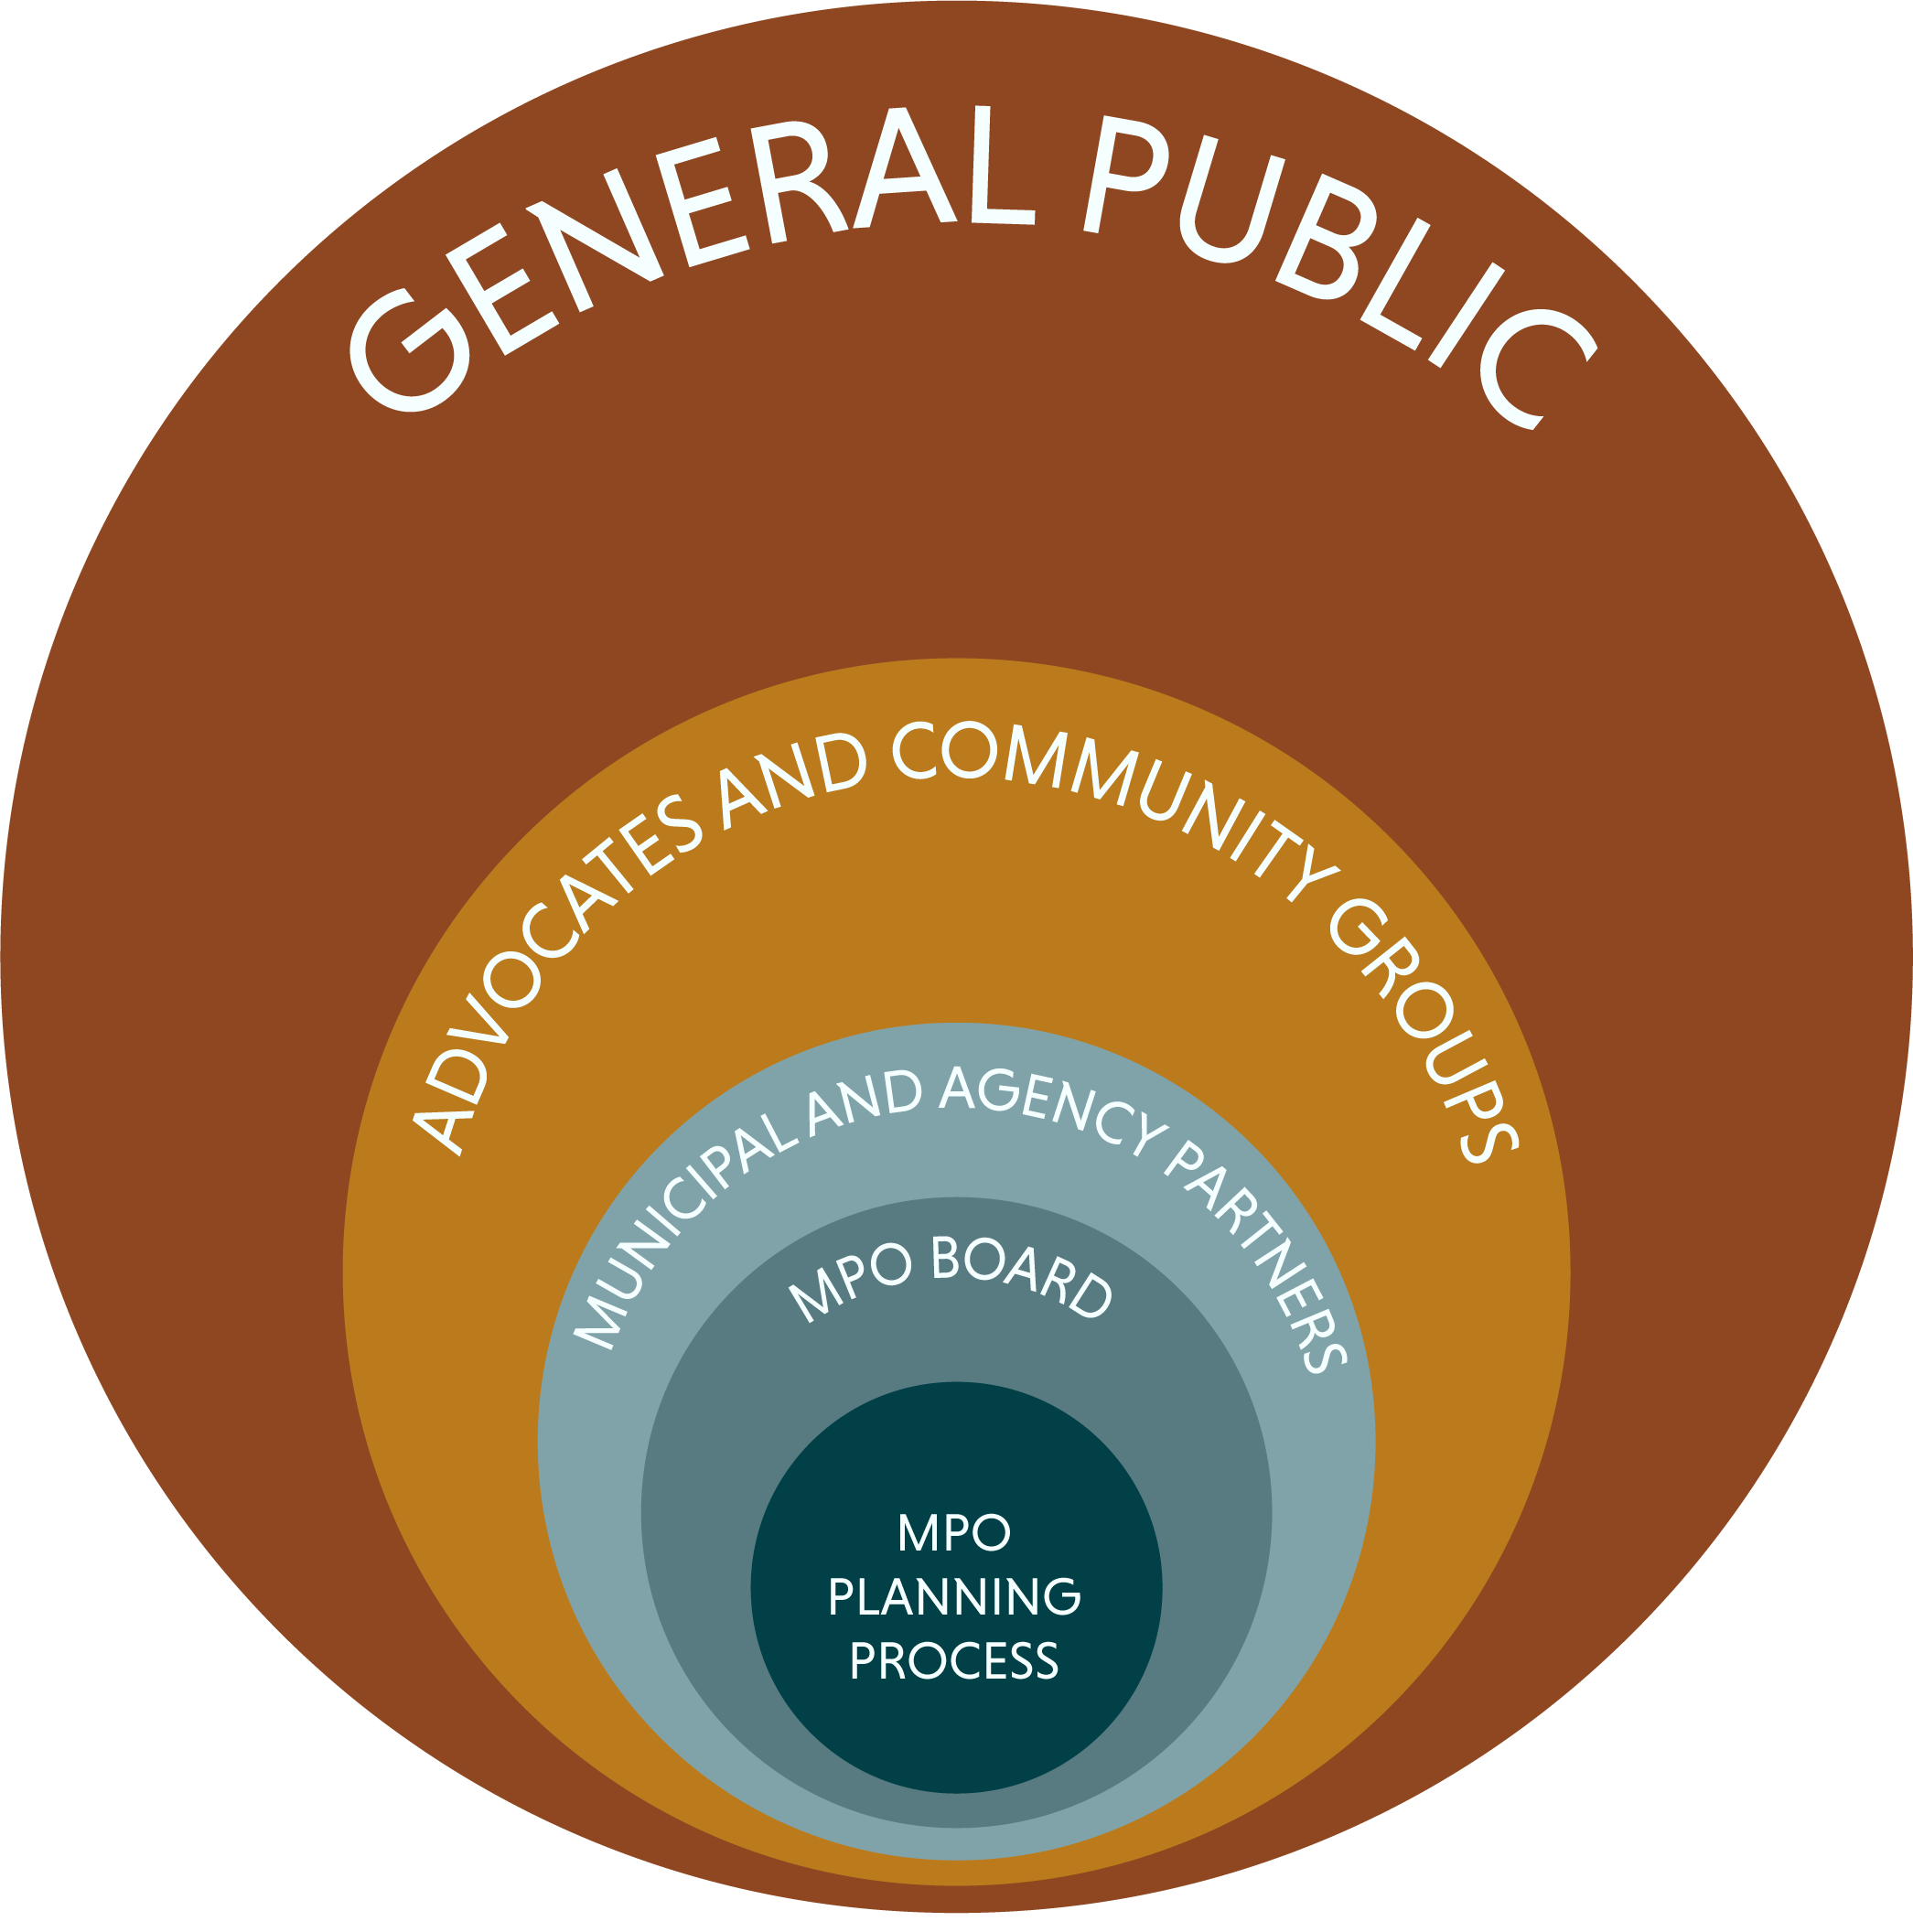 Circular diagram illustrating different categories of MPO stakeholders and their proximity to the planning process. The innermost circle is the MPO planning process, surrounded by the MPO Board; moving outwards, the next circle is municipal and agency partners, followed by two larger outer circles: advocates and community groups; and the general public furthest out.
